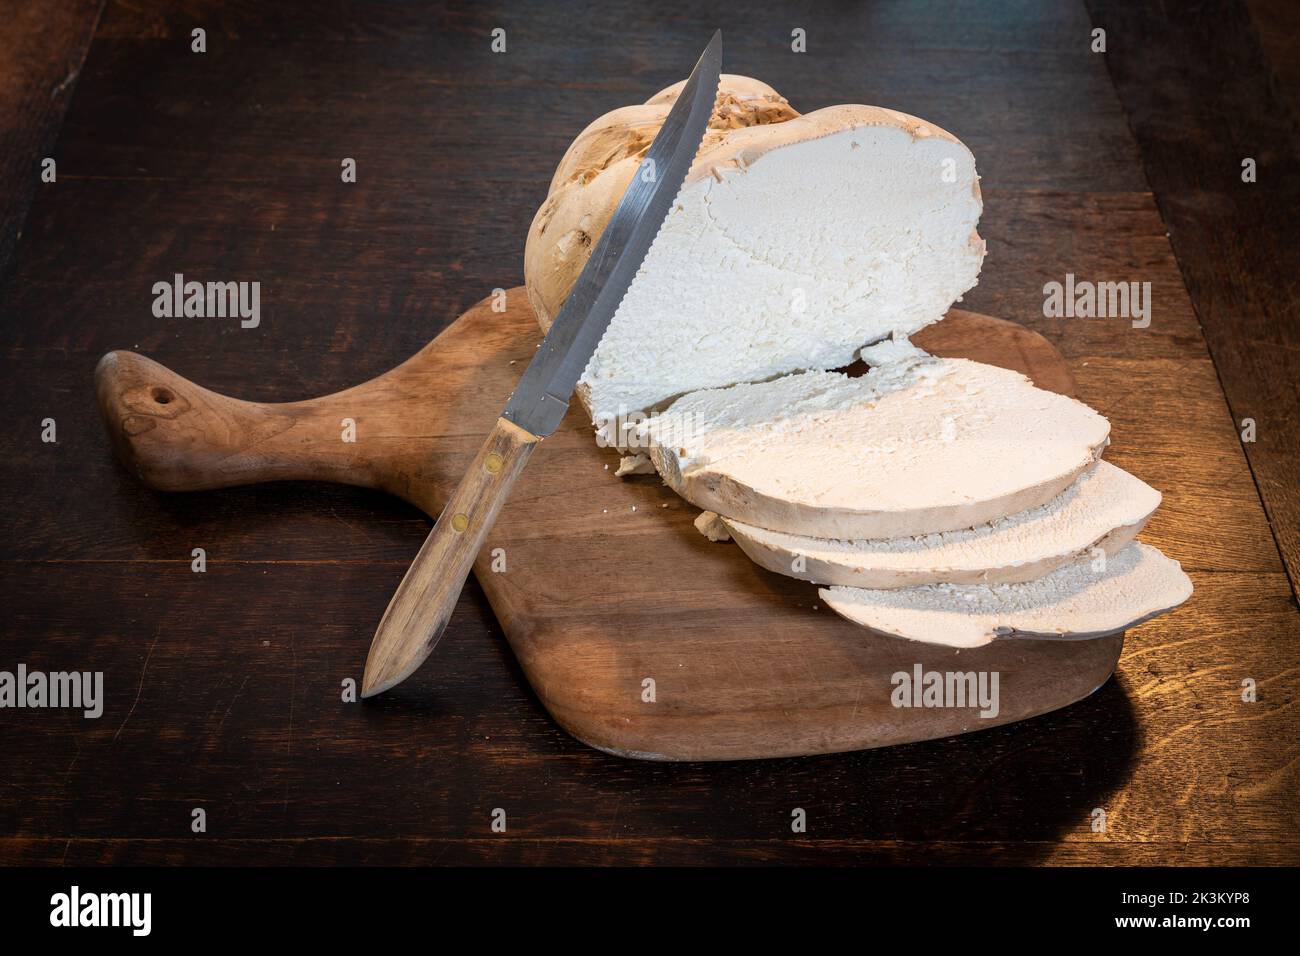 Sliced giant puffball in the kitchen, tasty edible mushroom ready to be fried Stock Photo